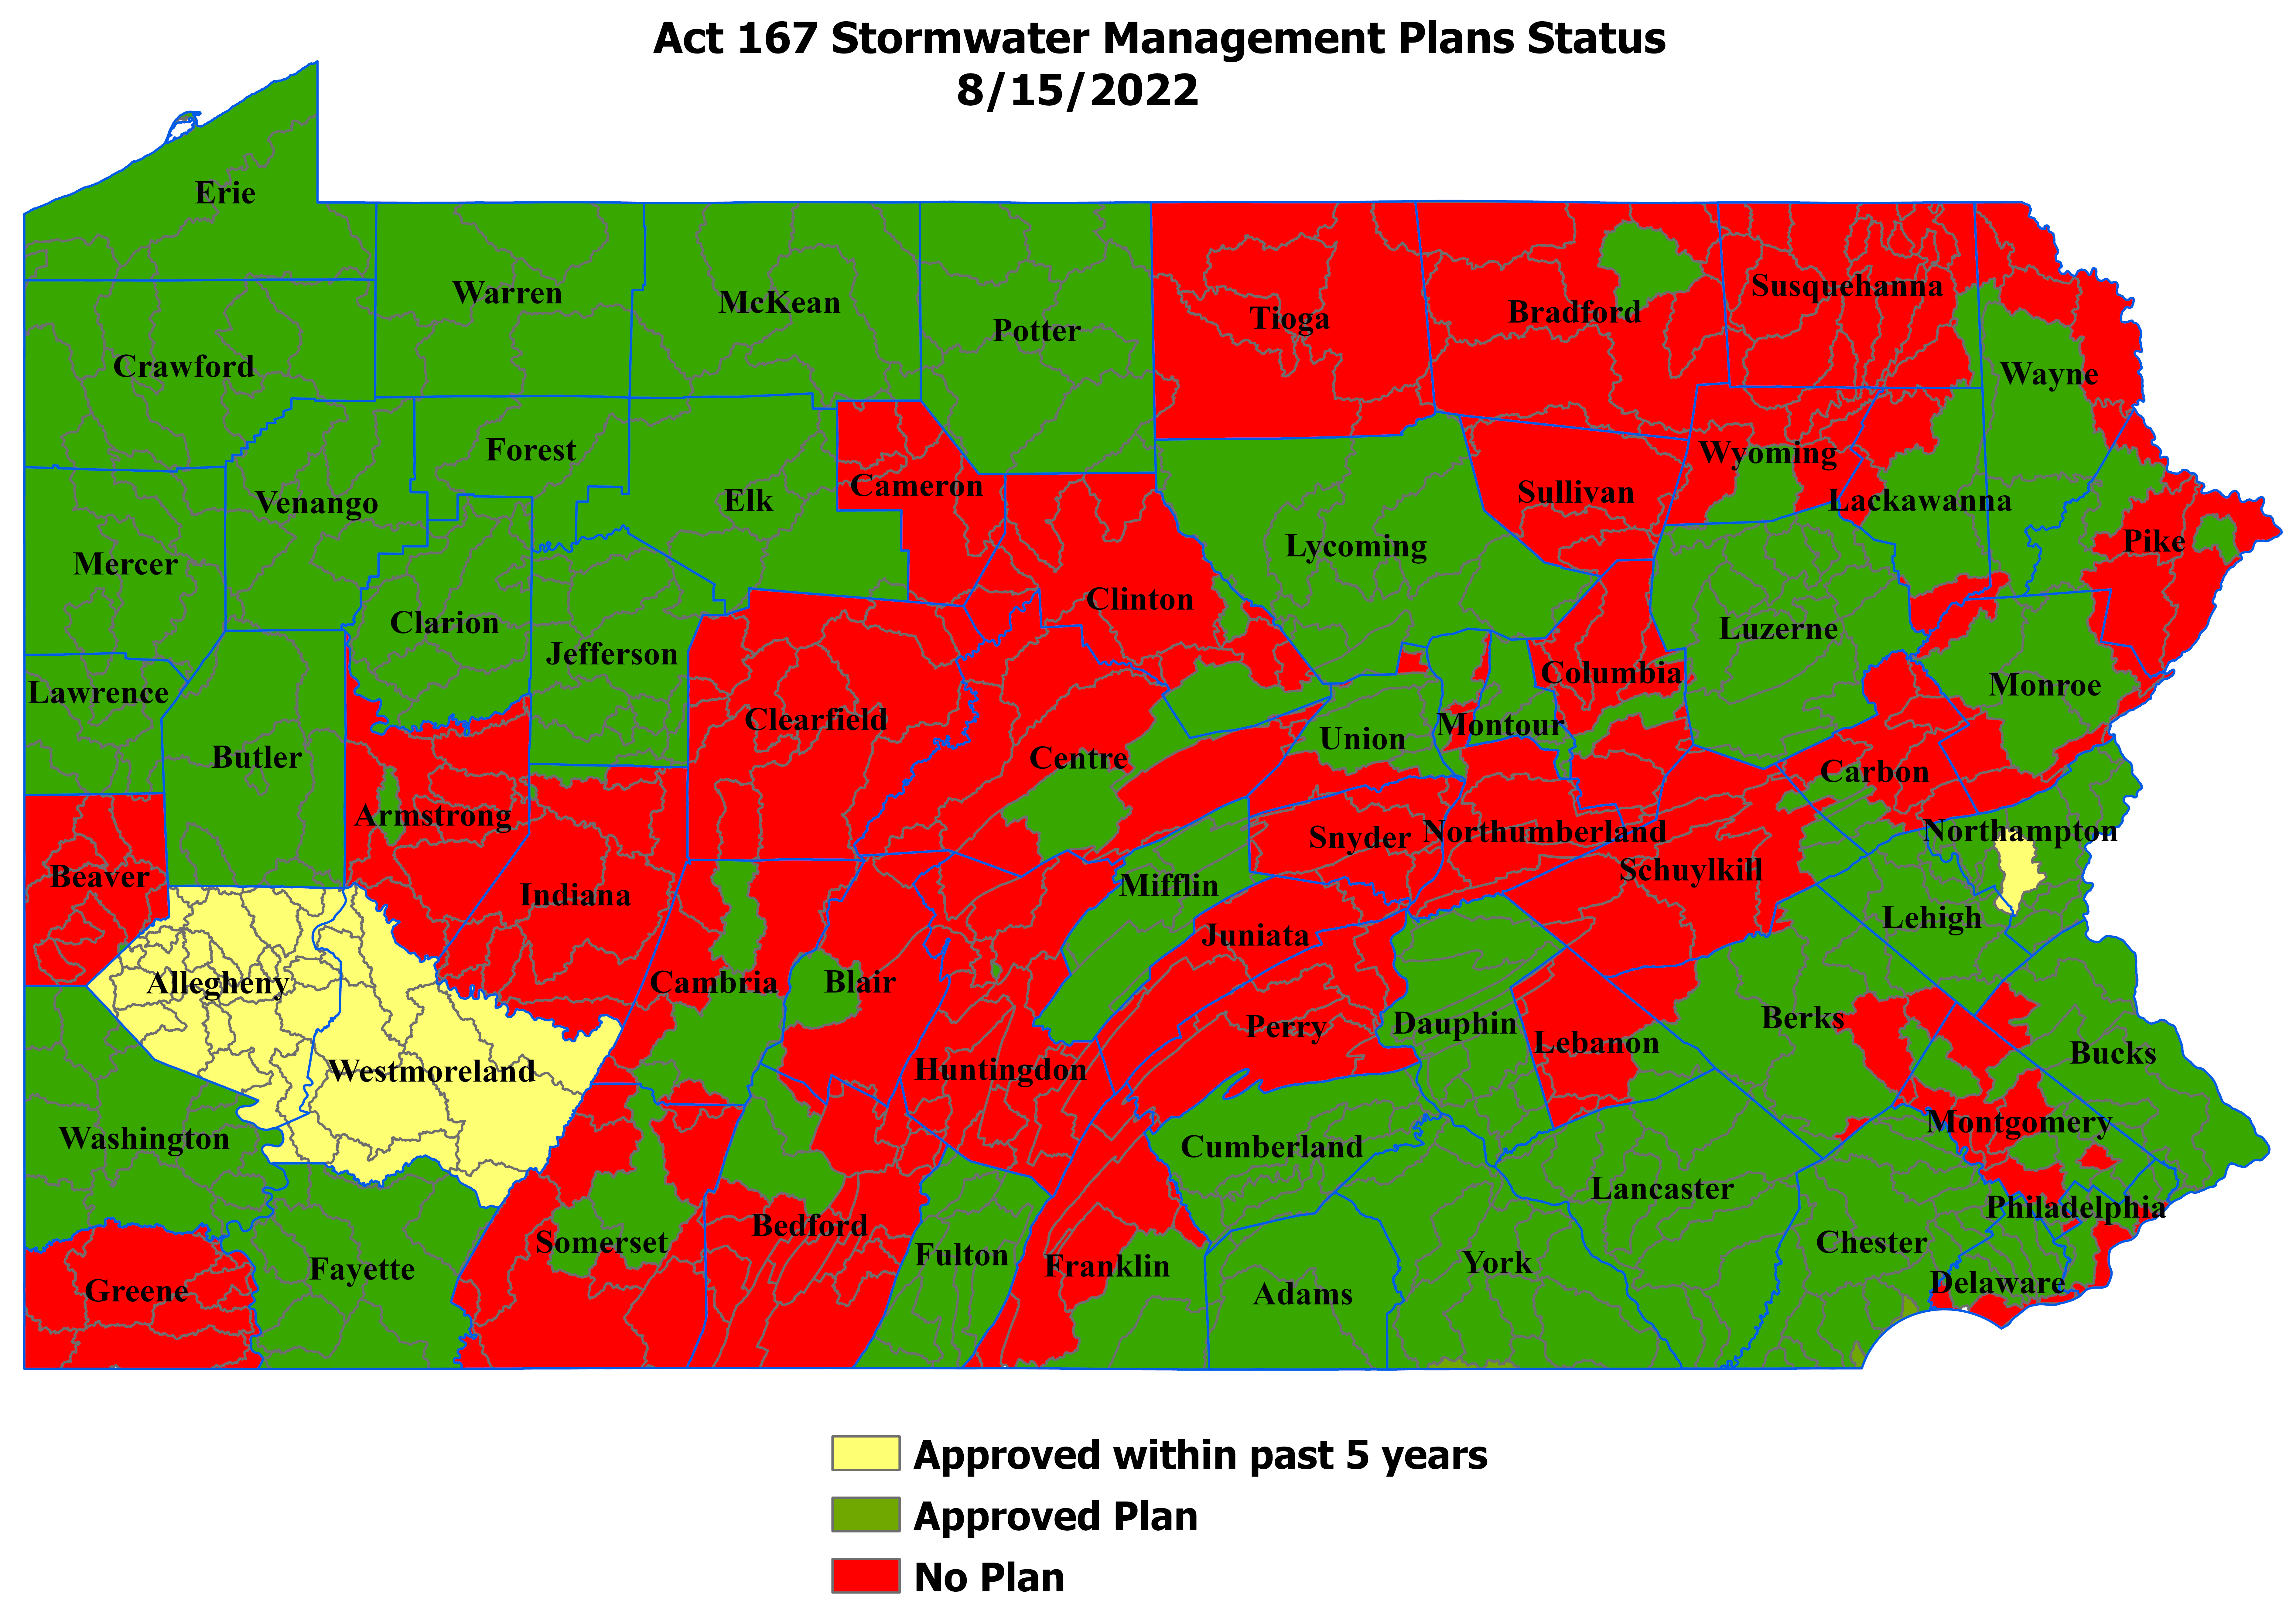 Act 167 Stormwater Management Plans Status Map 8-15-22